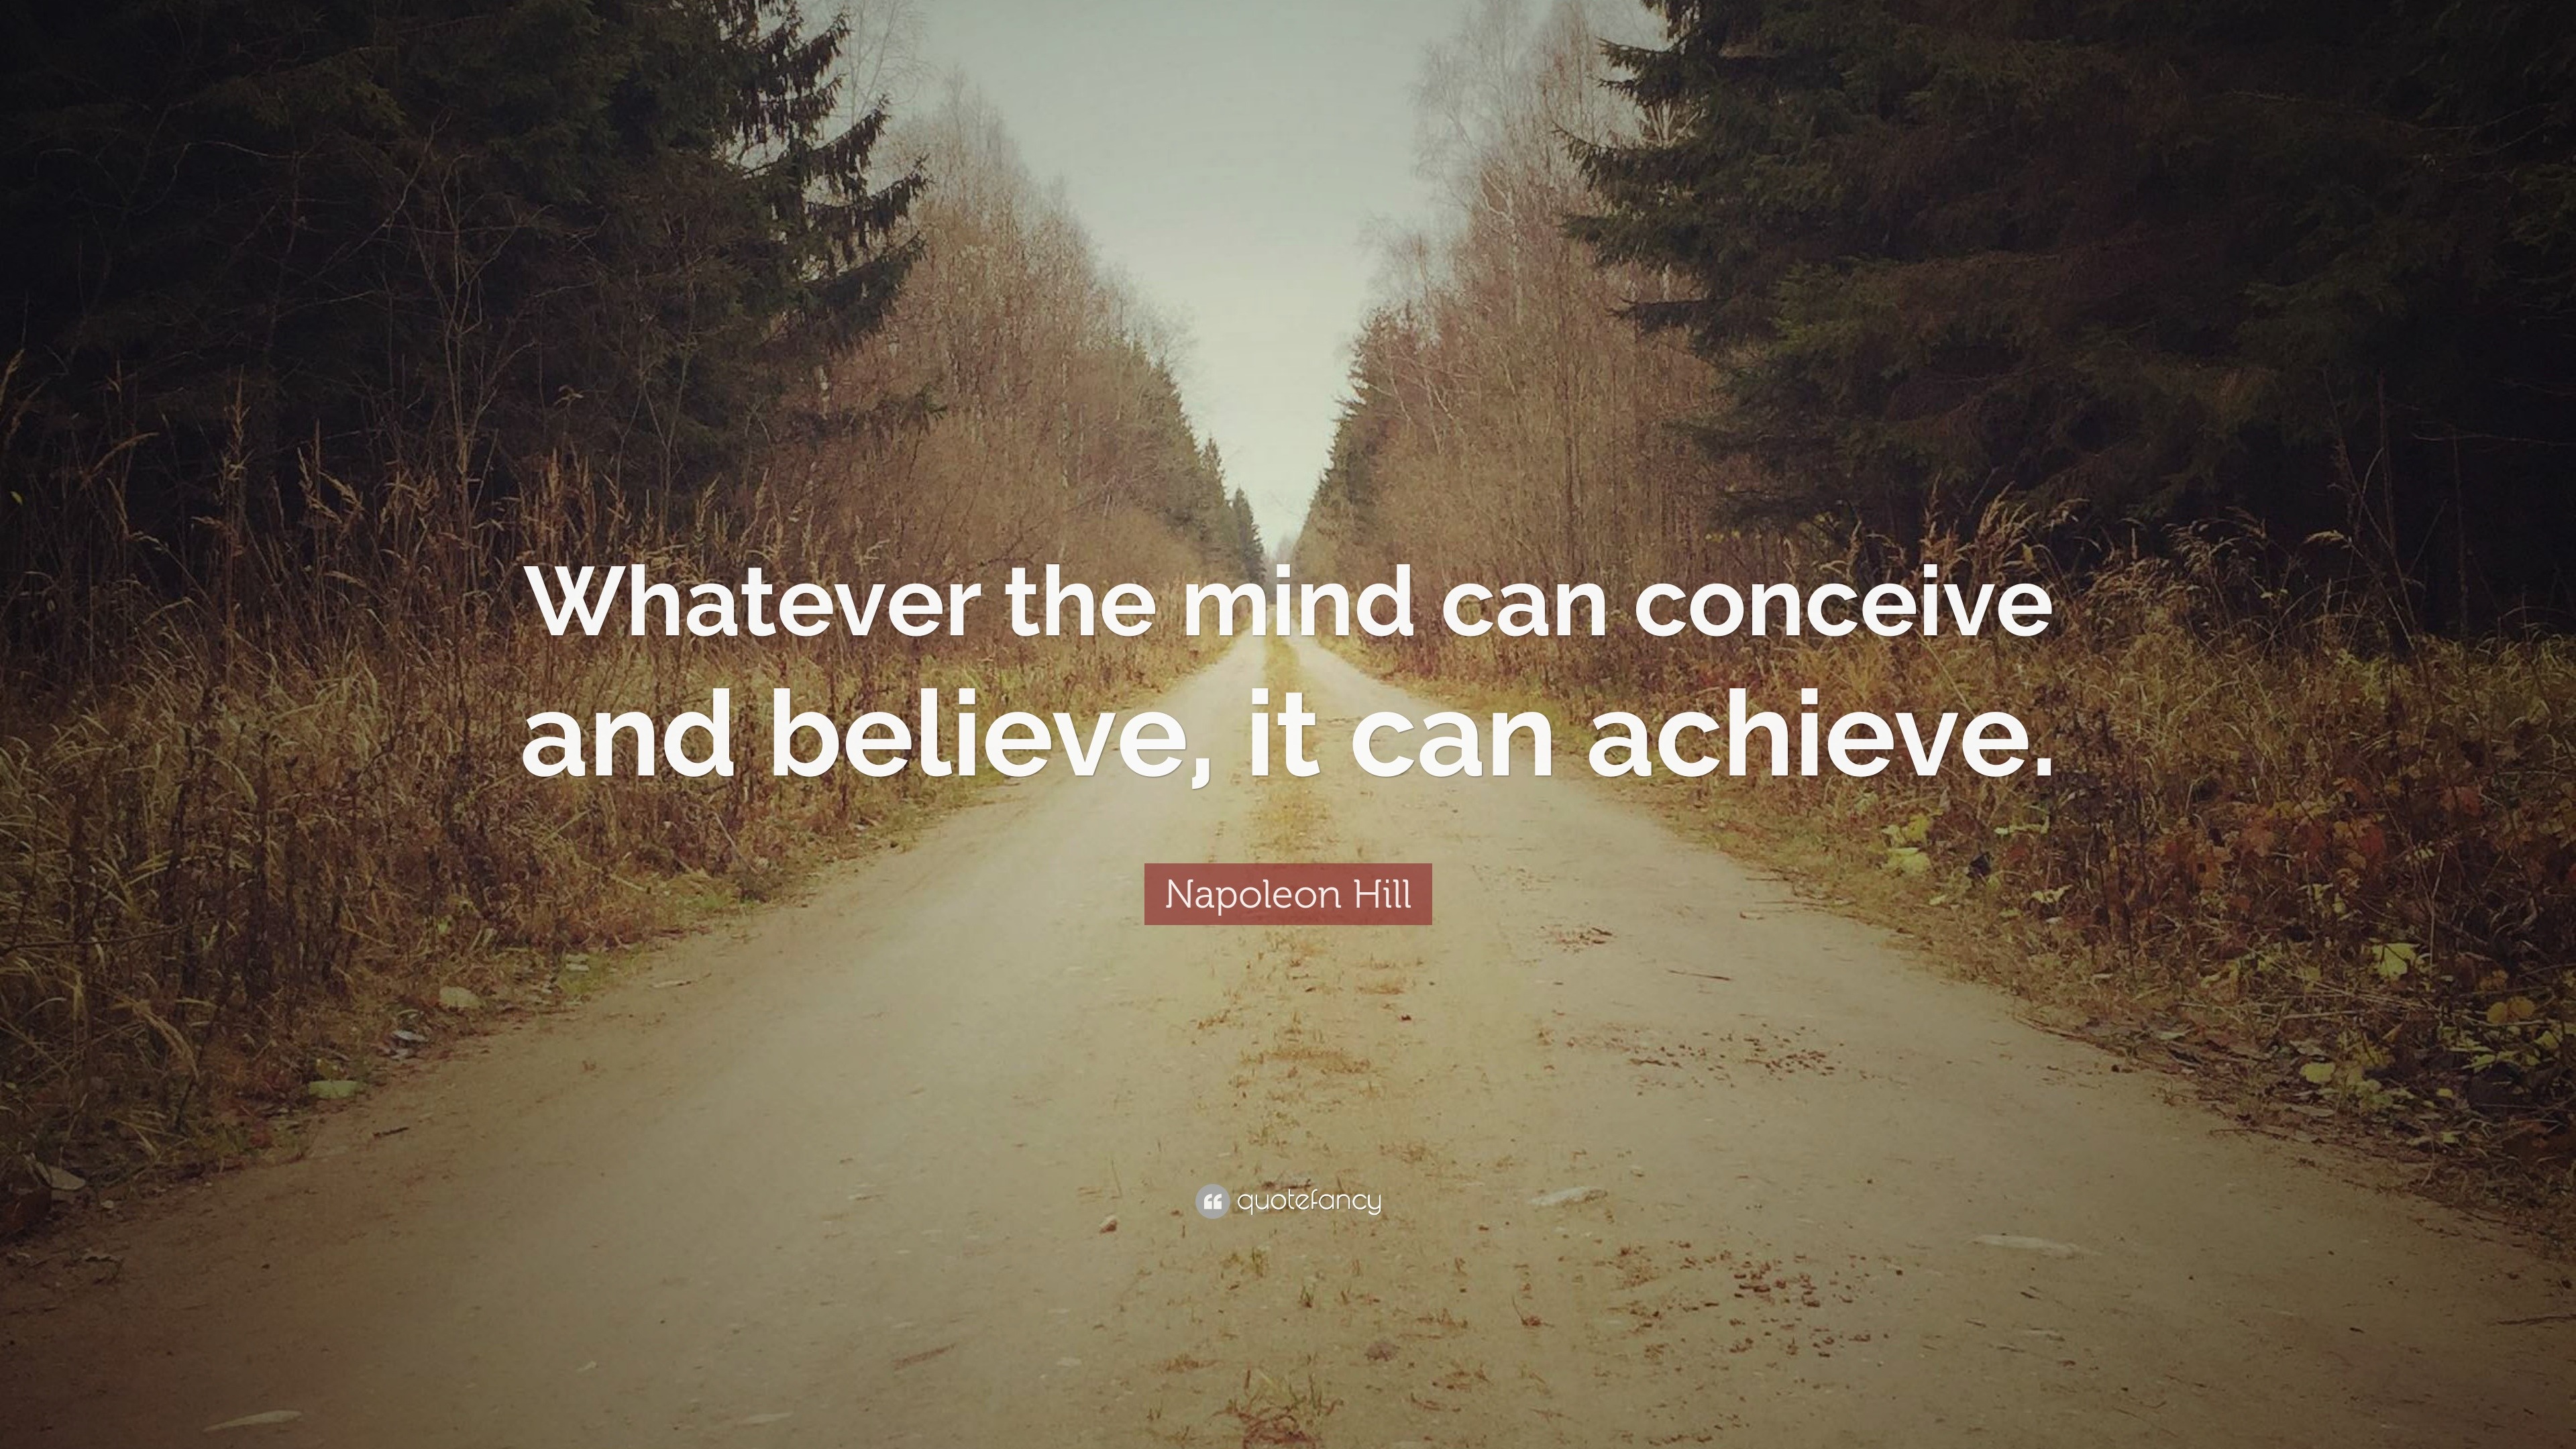 Napoleon Hill Quote “Whatever the mind can conceive and